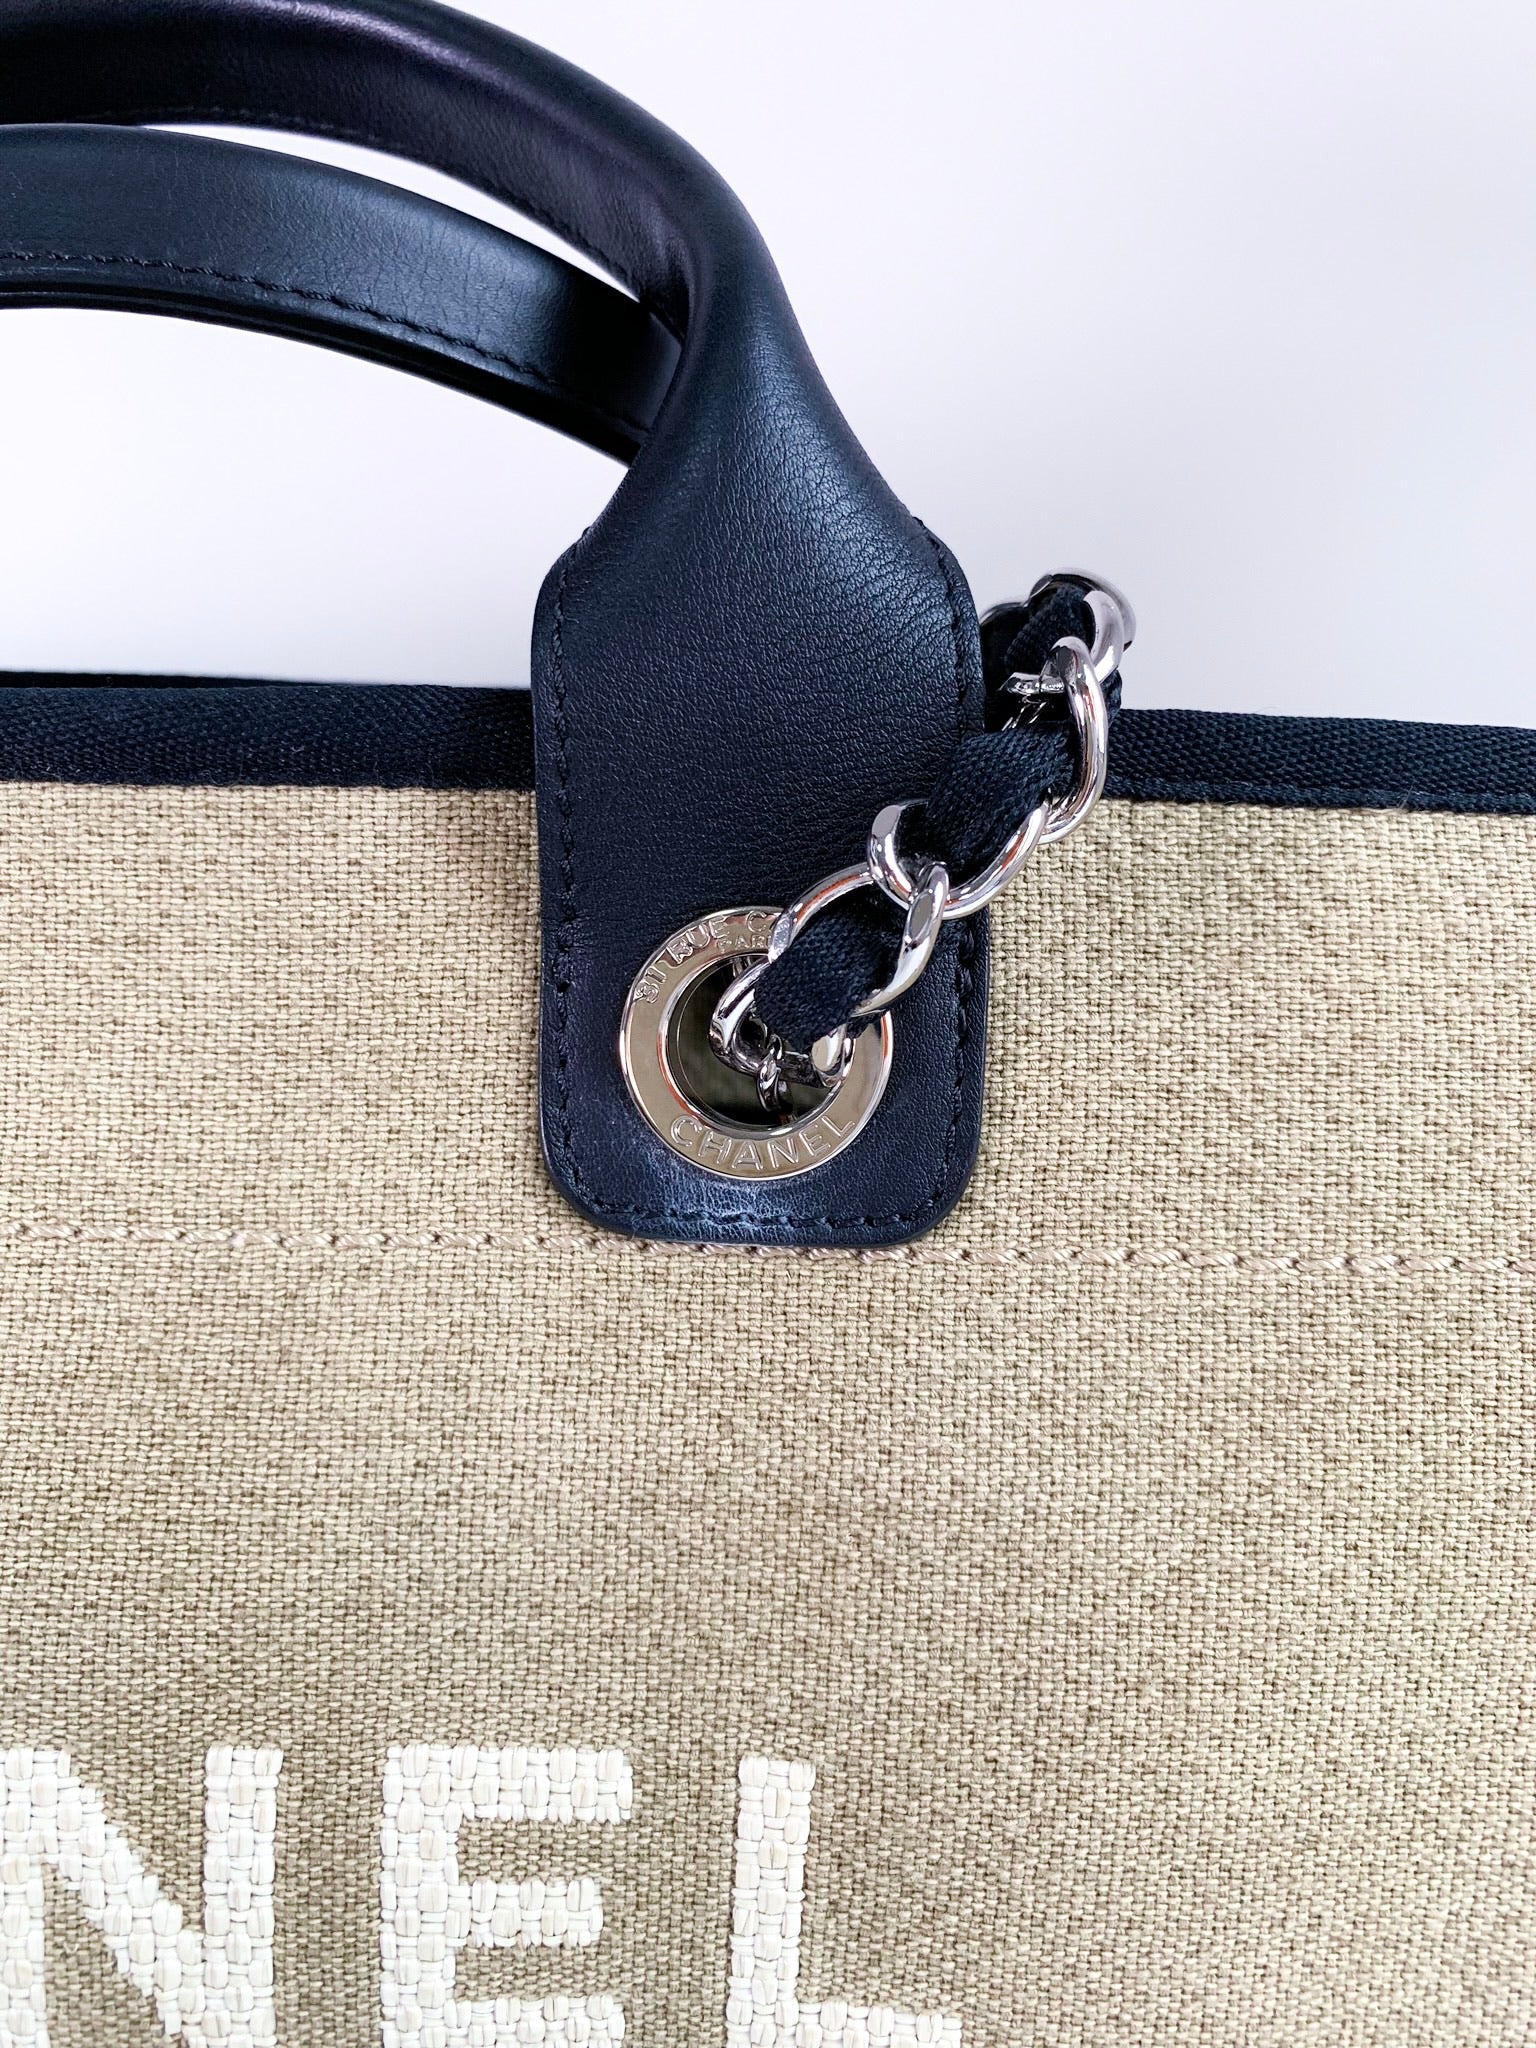 Chanel Canvas Large Deauville Tote Beige Black – Coco Approved Studio